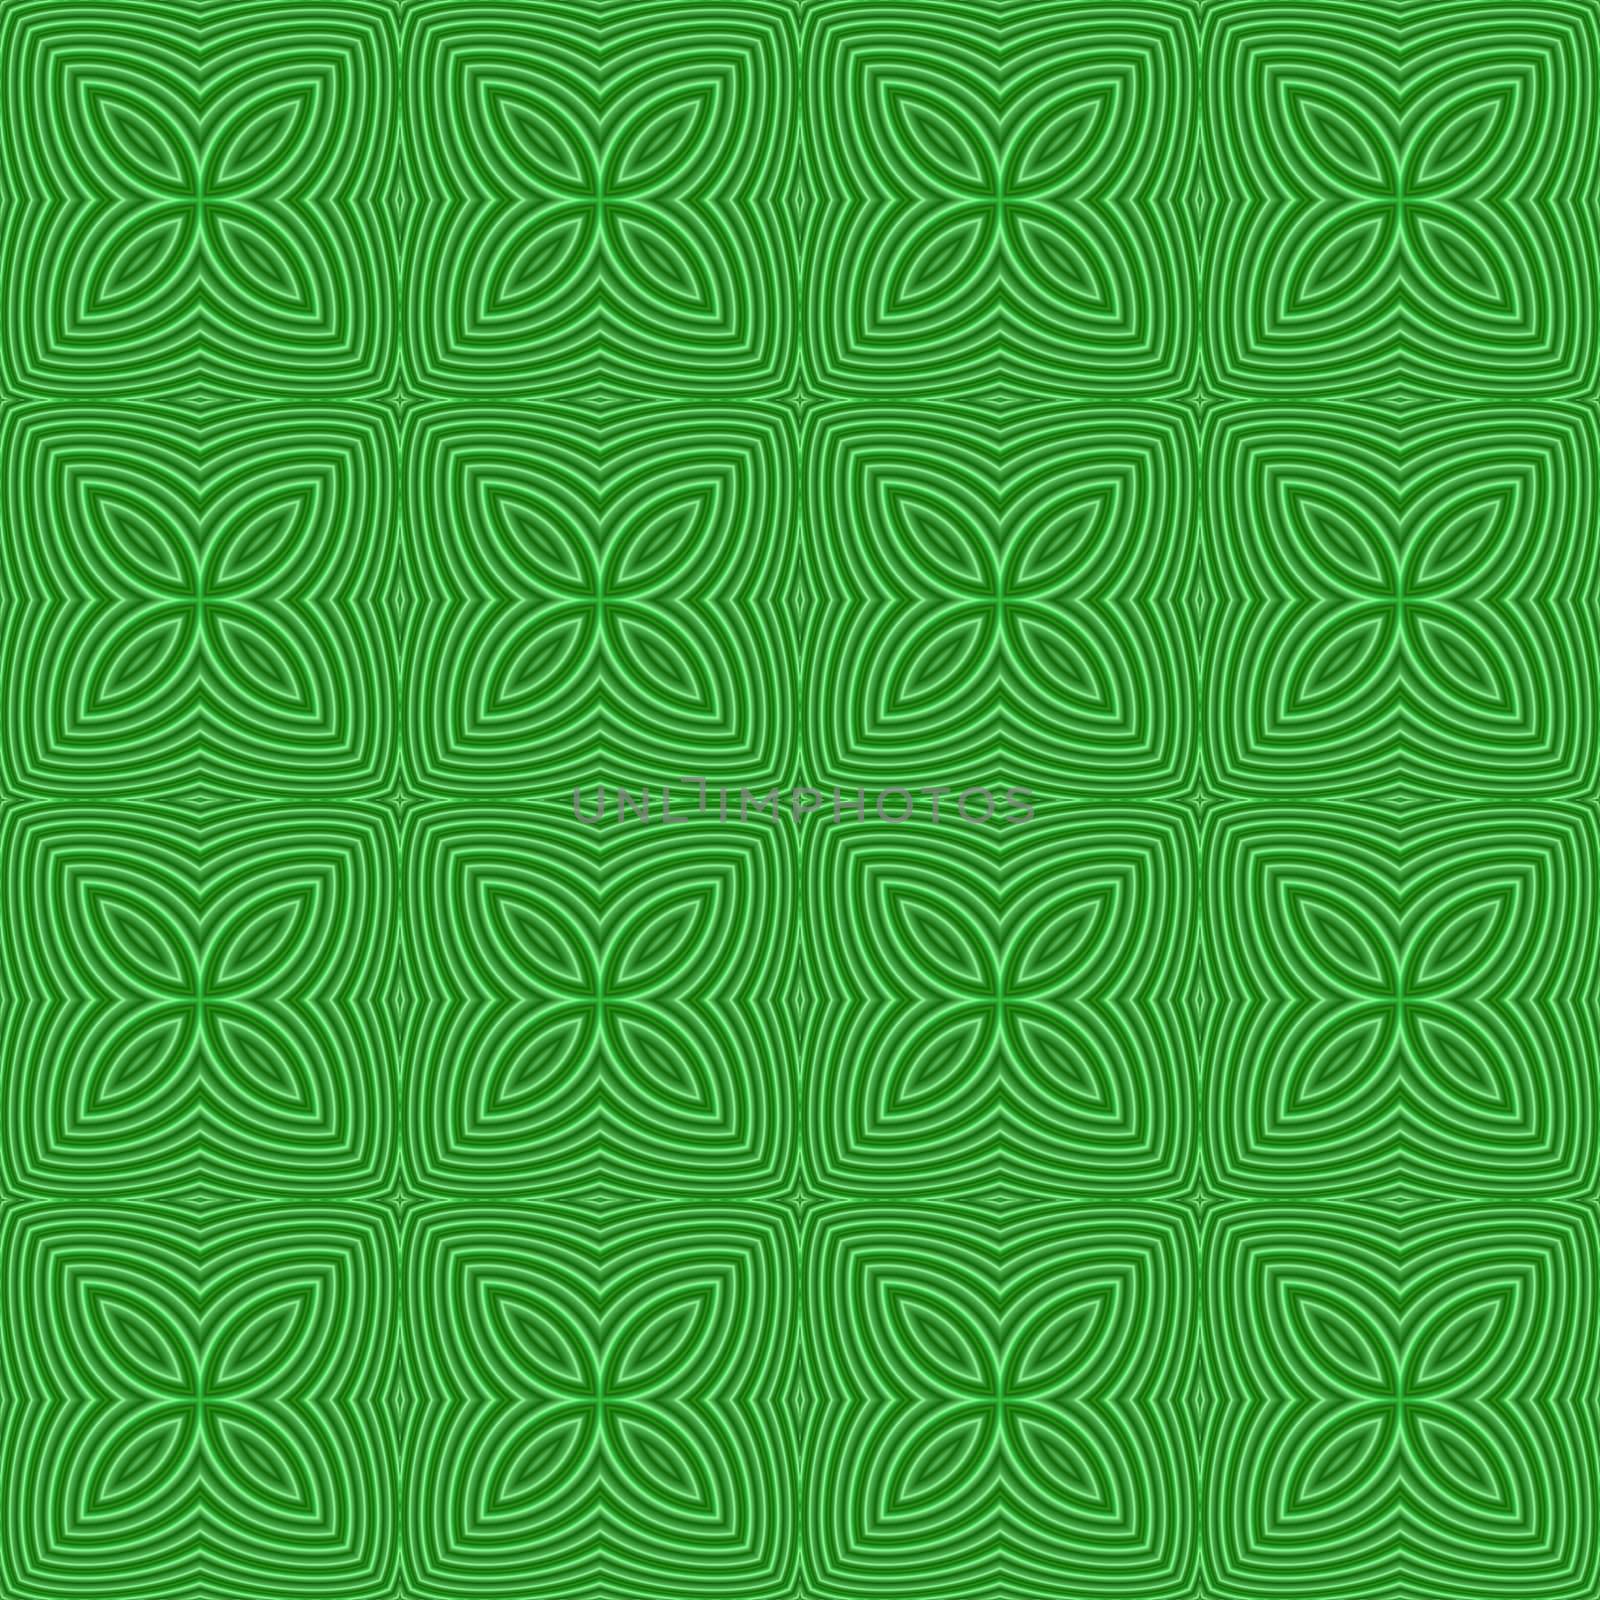 seamless tillable background texture like clover leaves for St. Patricks day